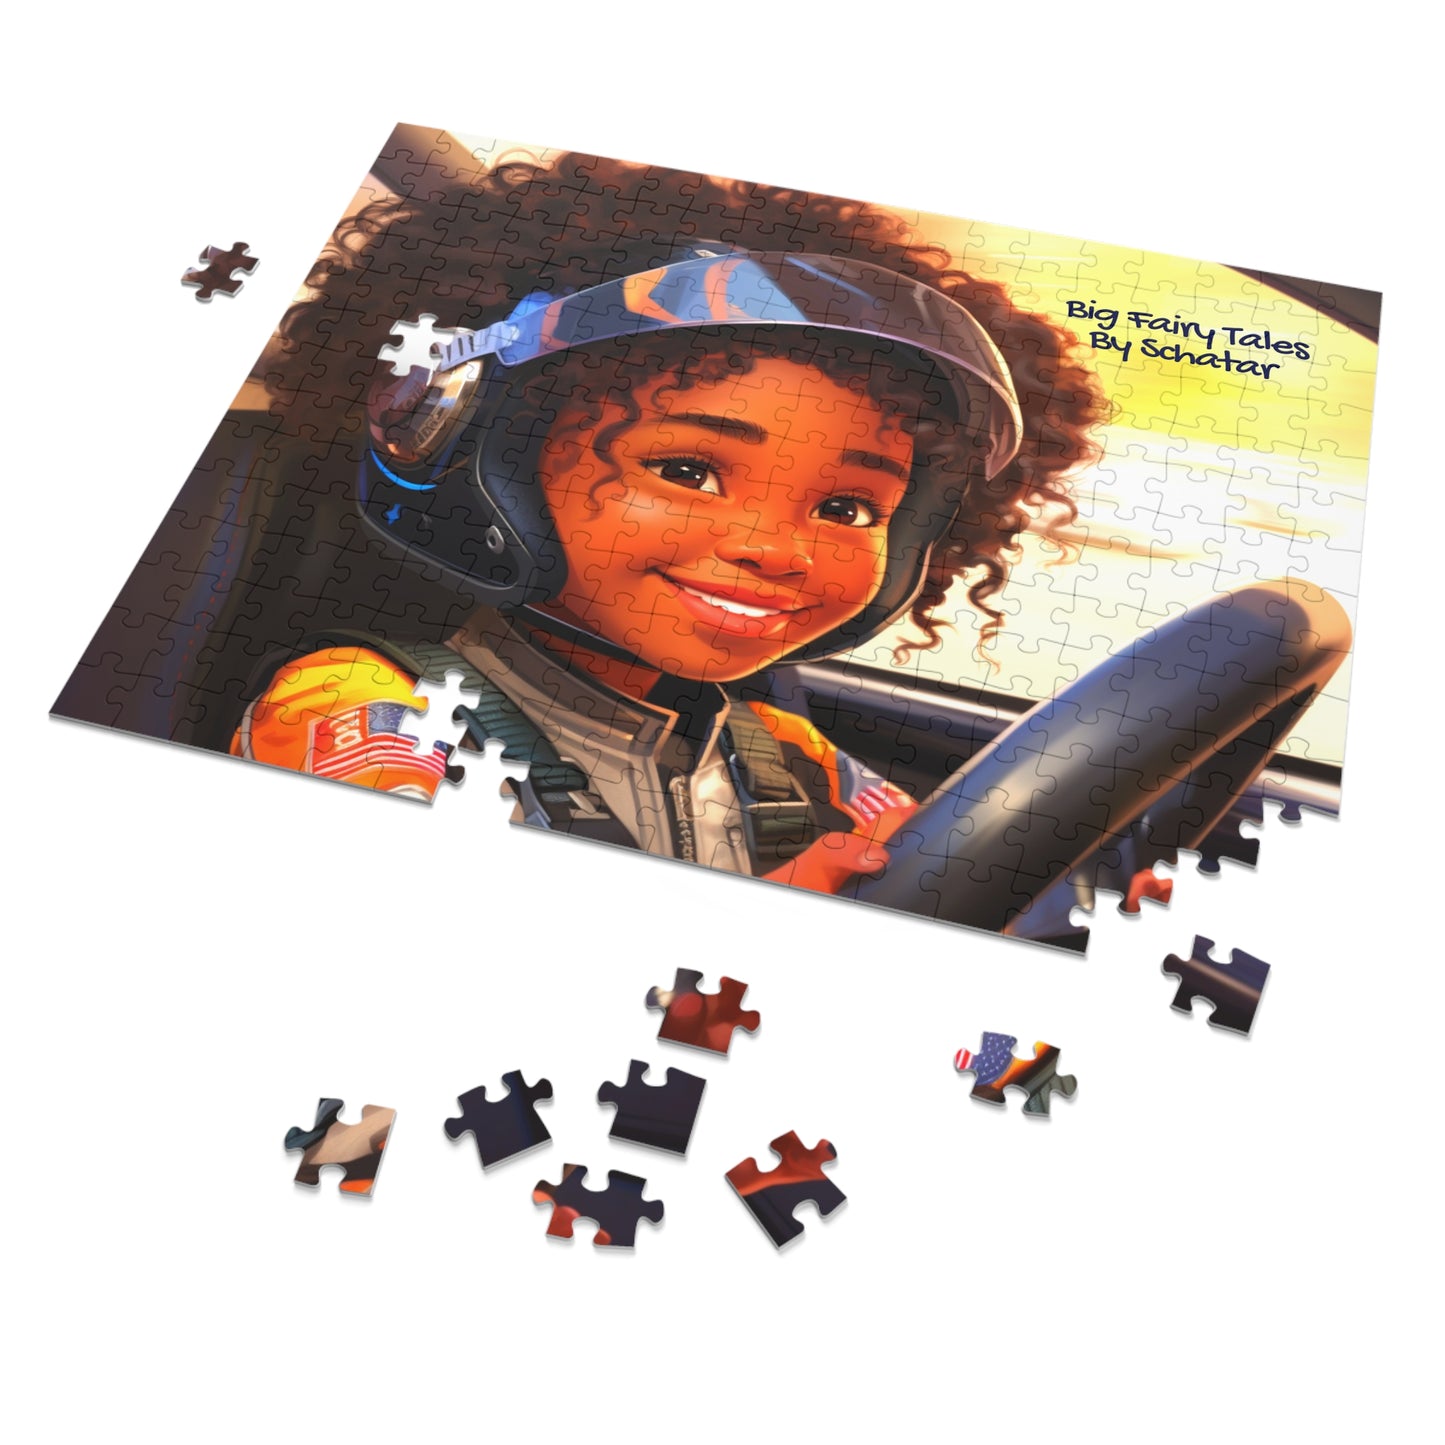 Race Car Driver - Big Little Professionals Puzzle 9 From Big Fairy Tales By Schatar